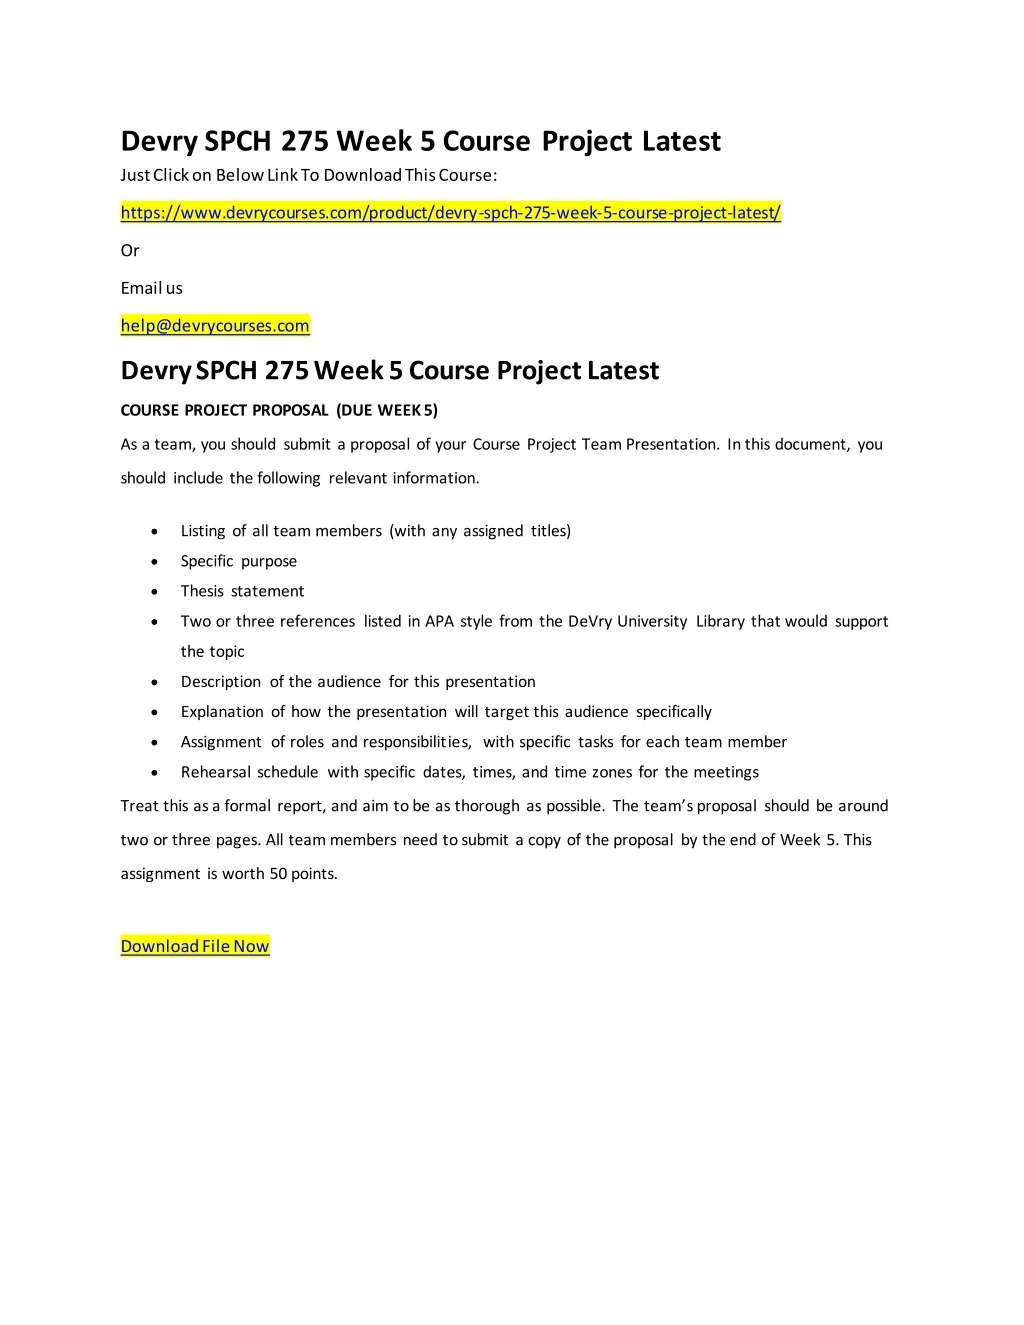 devry spch 275 week 5 course project latest just